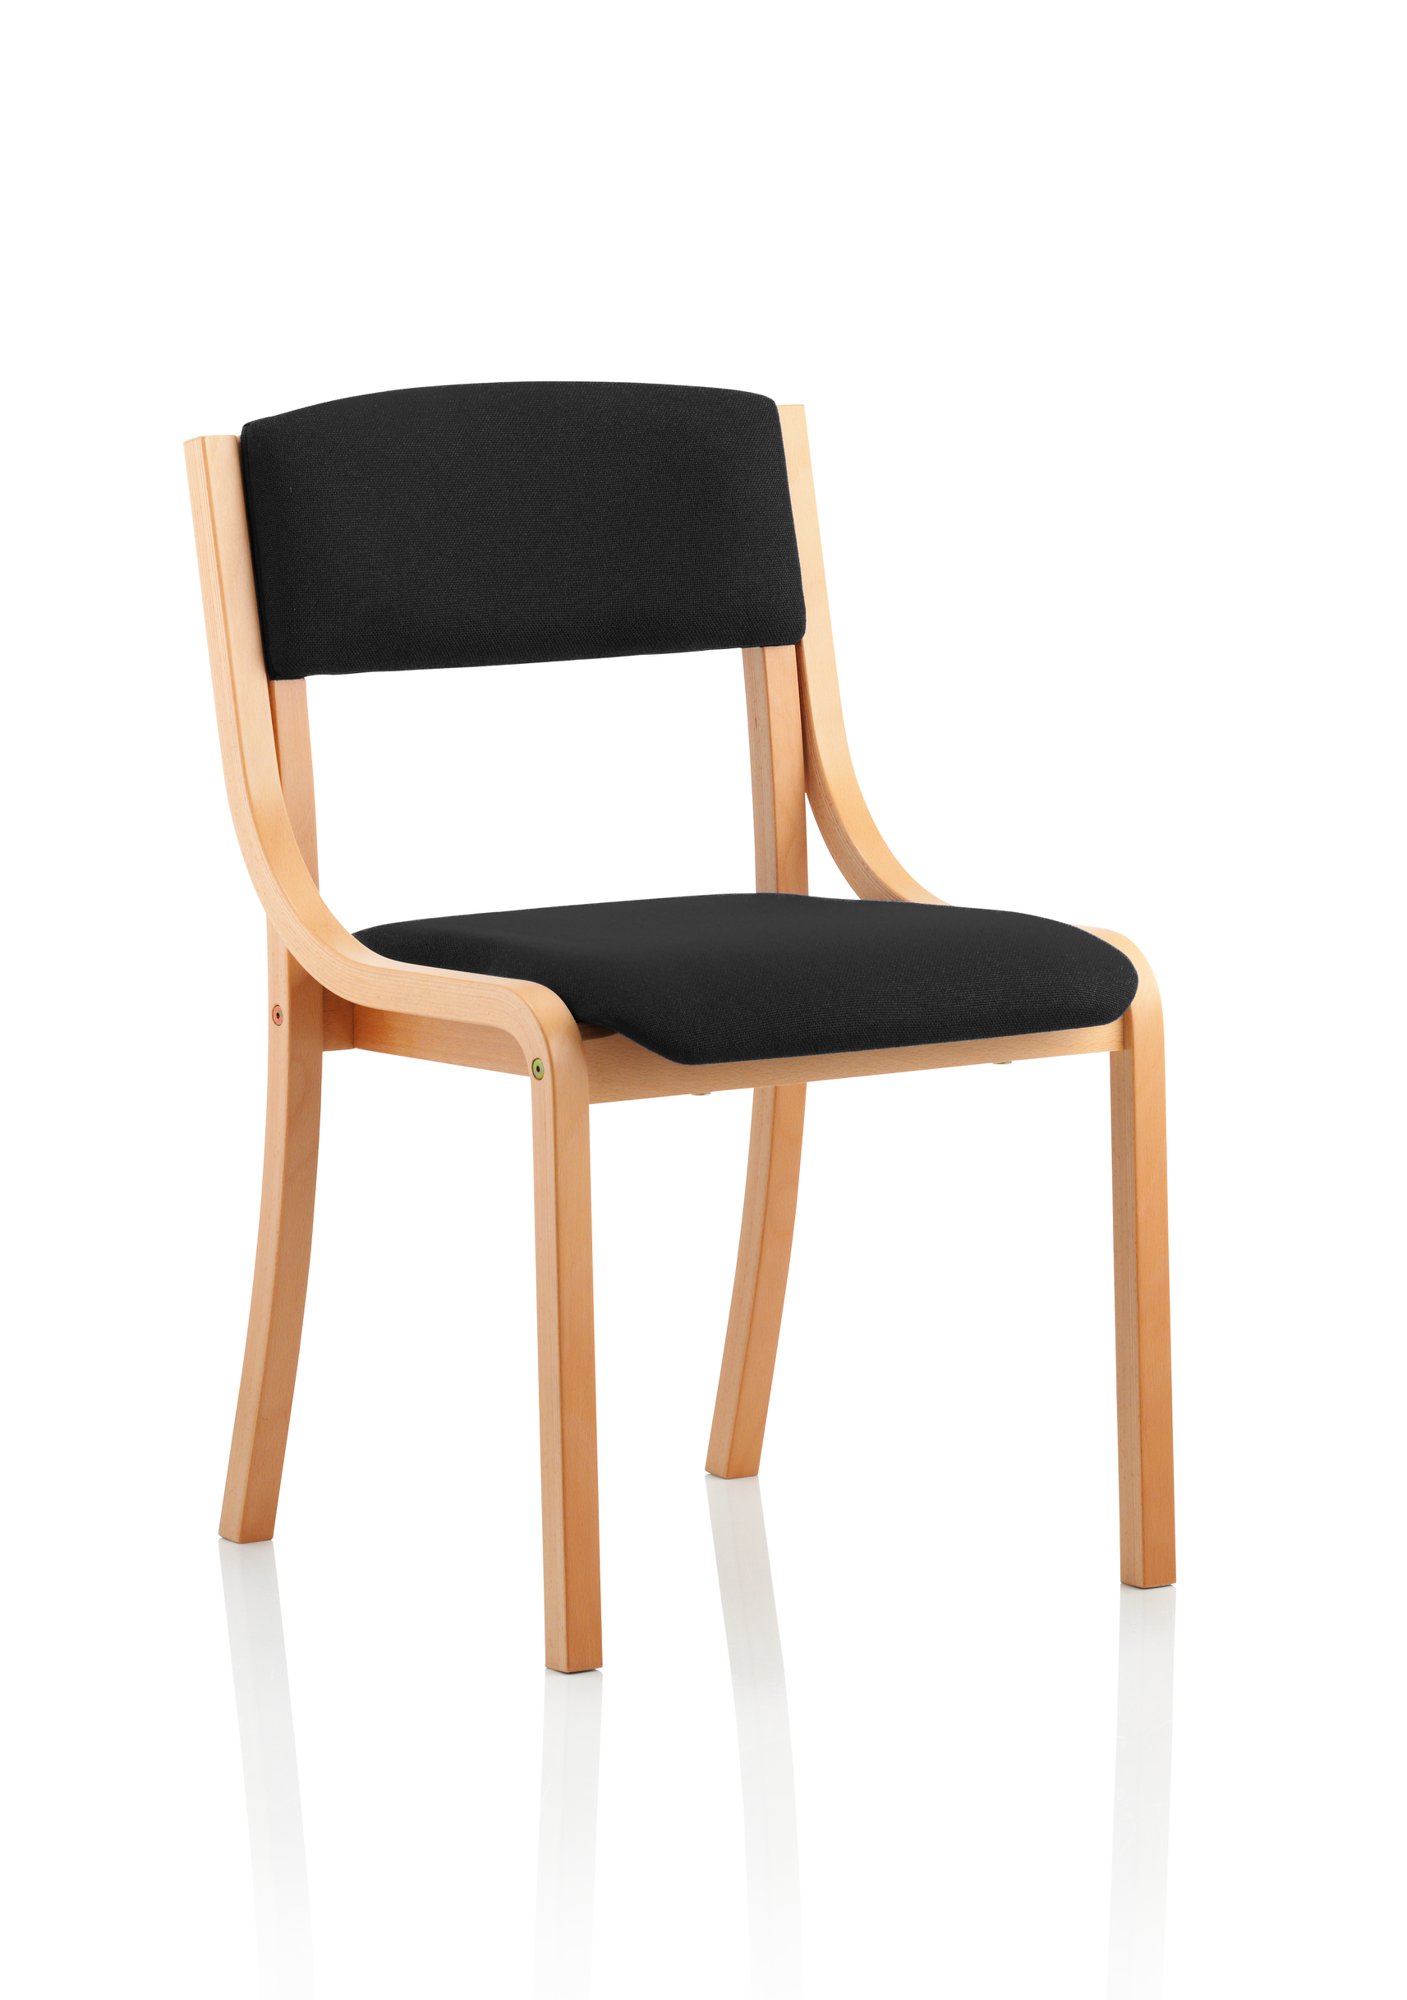 Stacking Chairs Madrid Visitor Chair Black BR000086